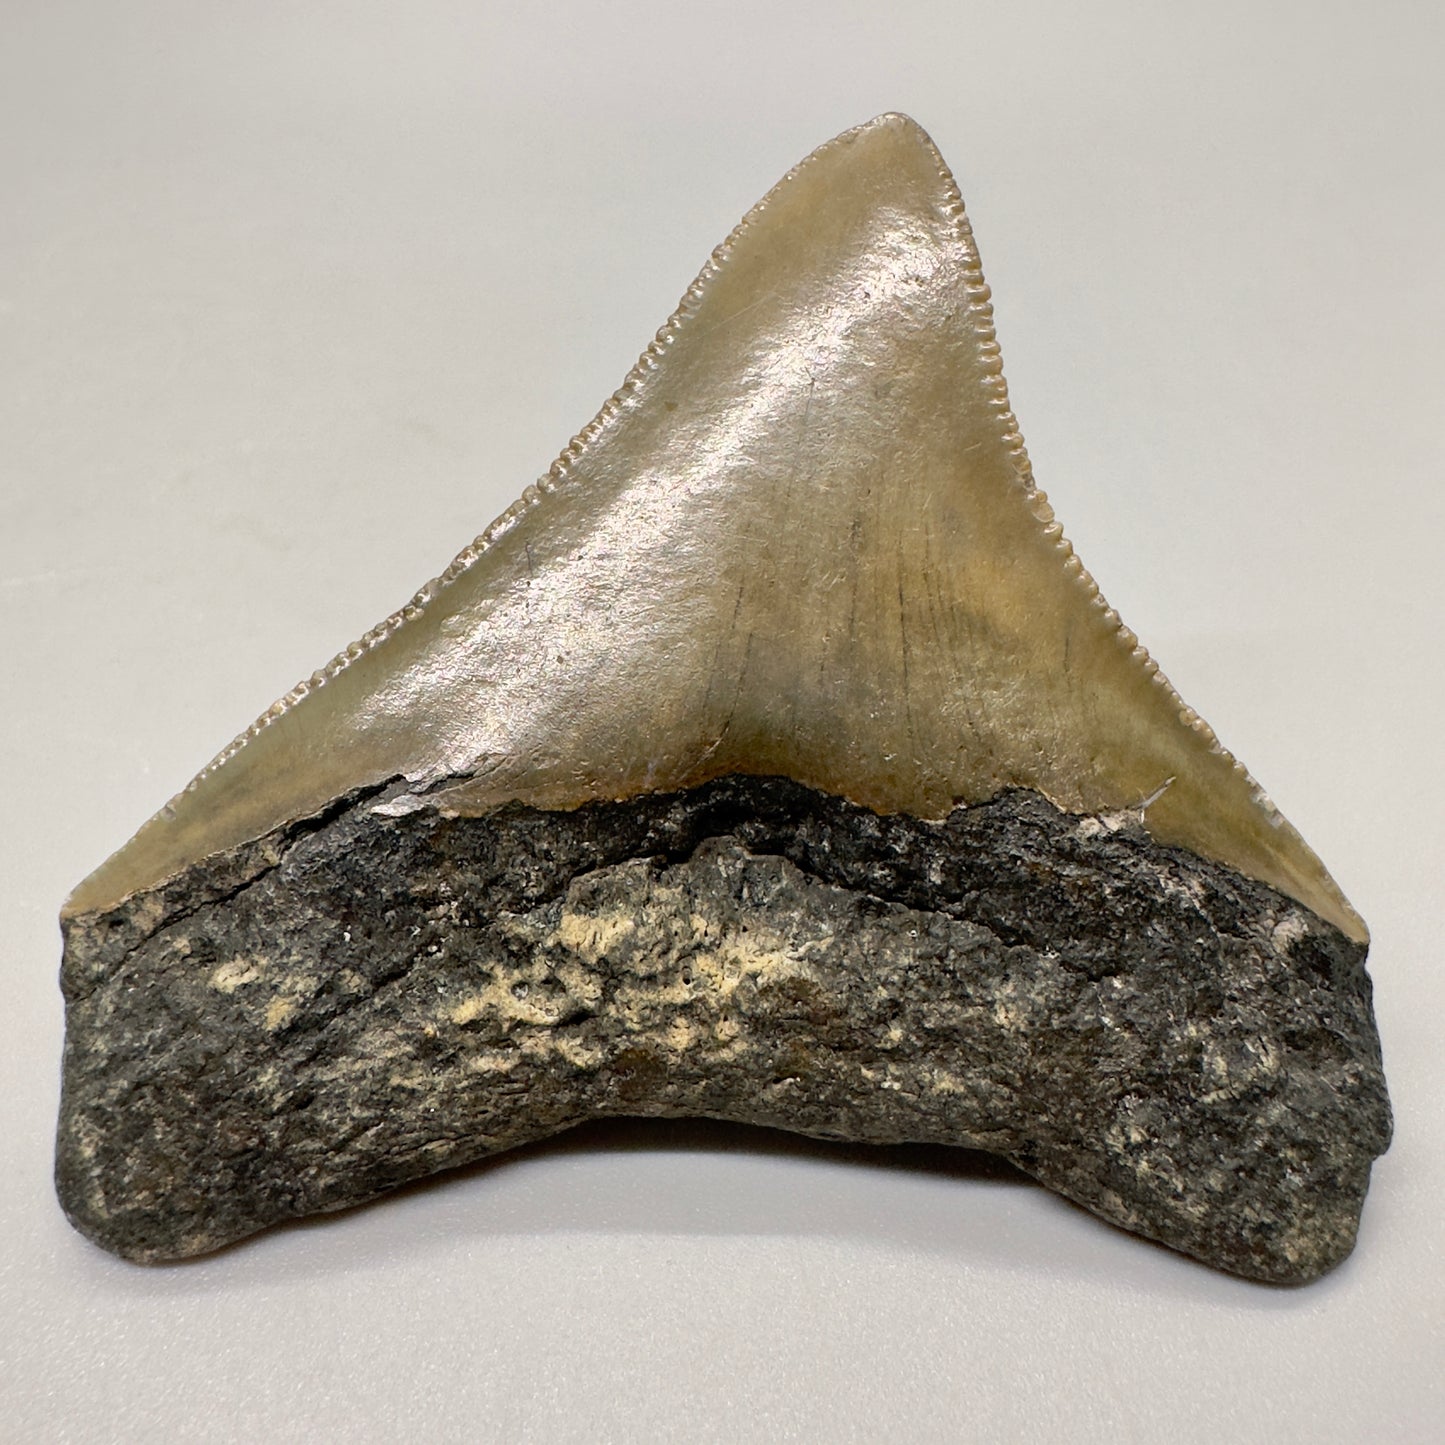 Colorful posterior 2.56" Fossil Megalodon Tooth from North Carolina Diving Discovery- Back